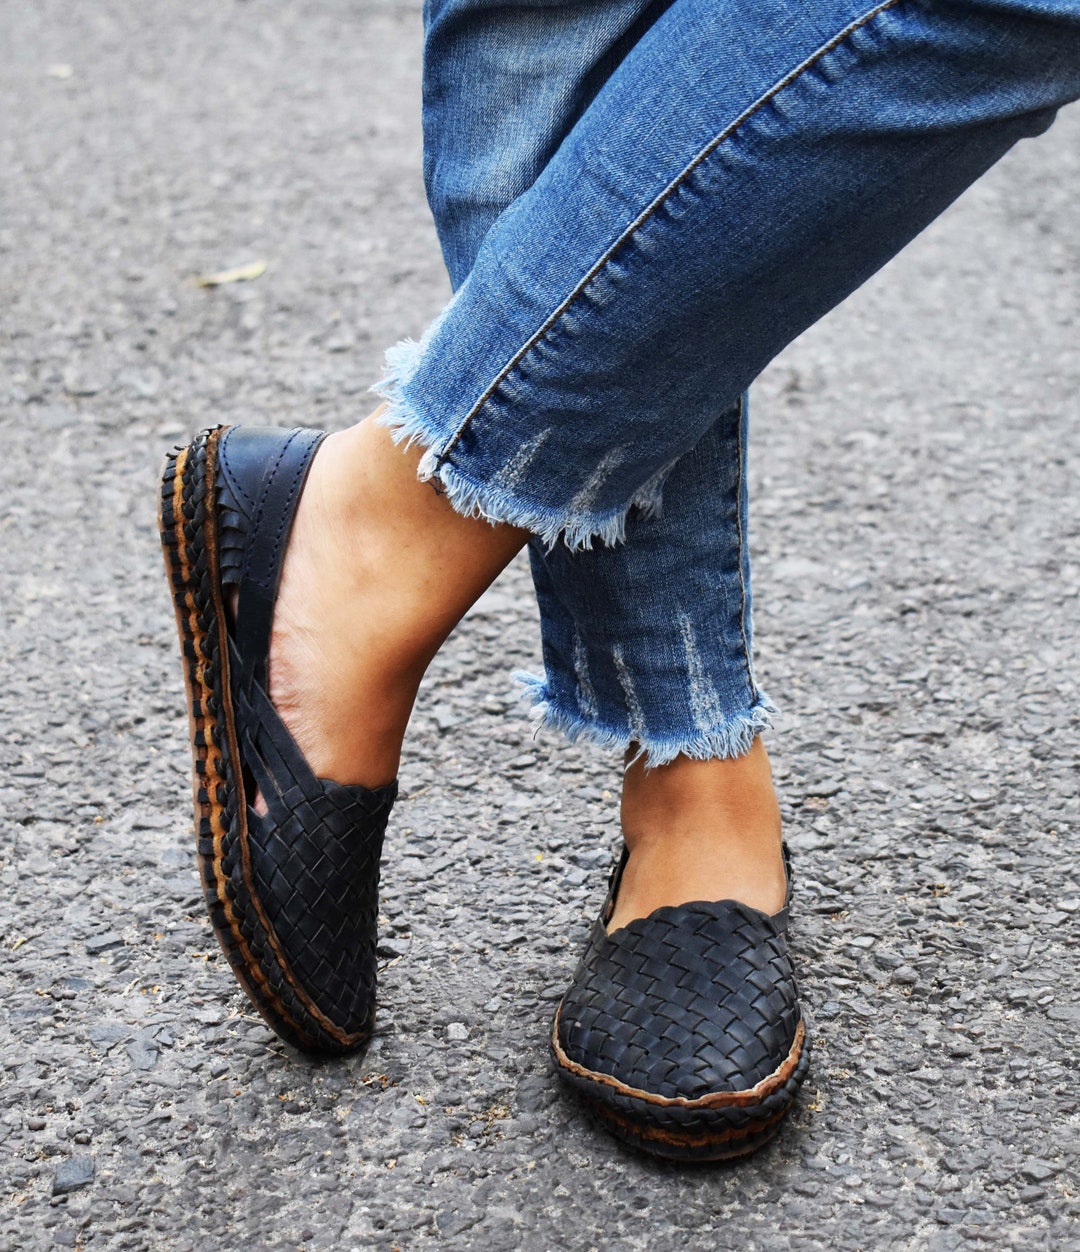 How To Wear Espadrilles For Summer - an indigo day